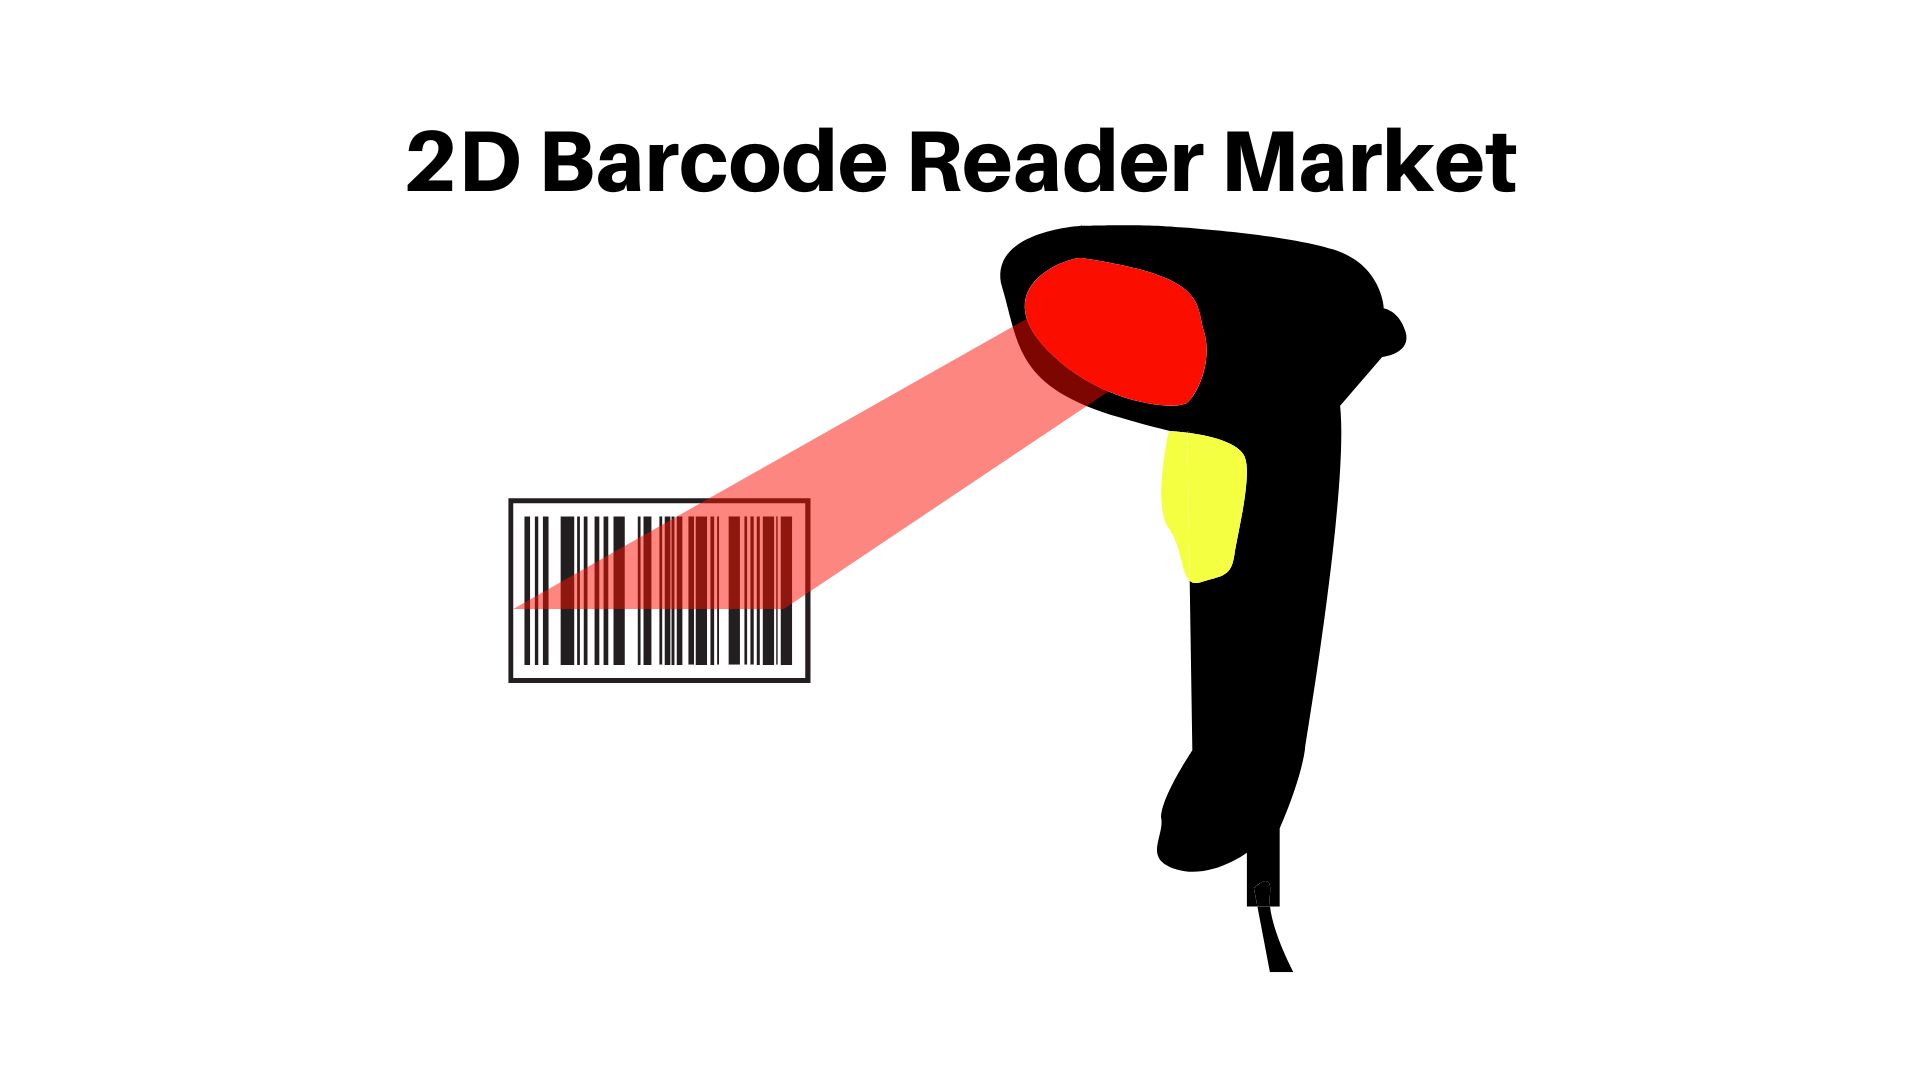 2D Barcode Reader Market Size USD 13.7 bn | Vendors Analysis (Ingenico, Verifone) By 2032 | US Crisis Impact 2023